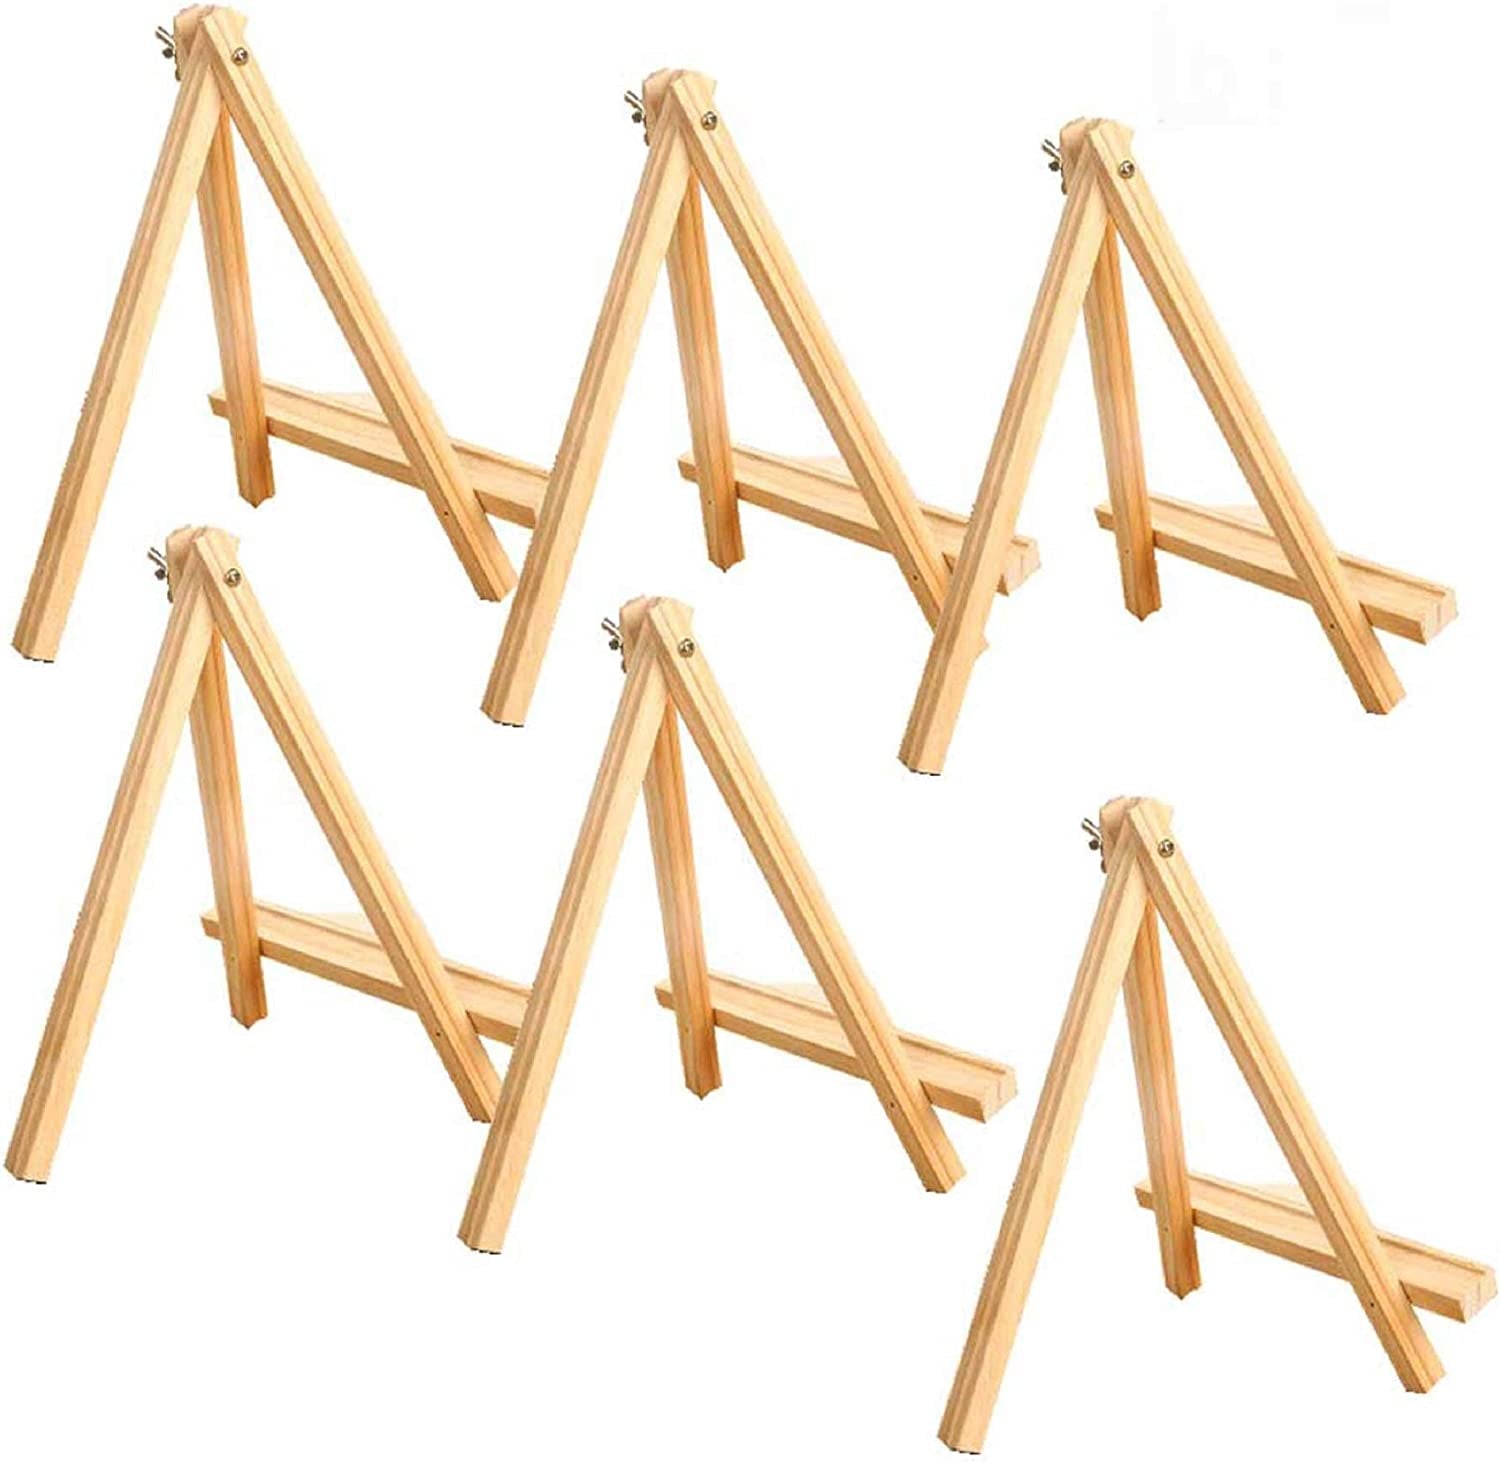 Wesiti 12 Pcs 12 Tall Wood Easels Tabletop Display Easel Arts Crafts Easels